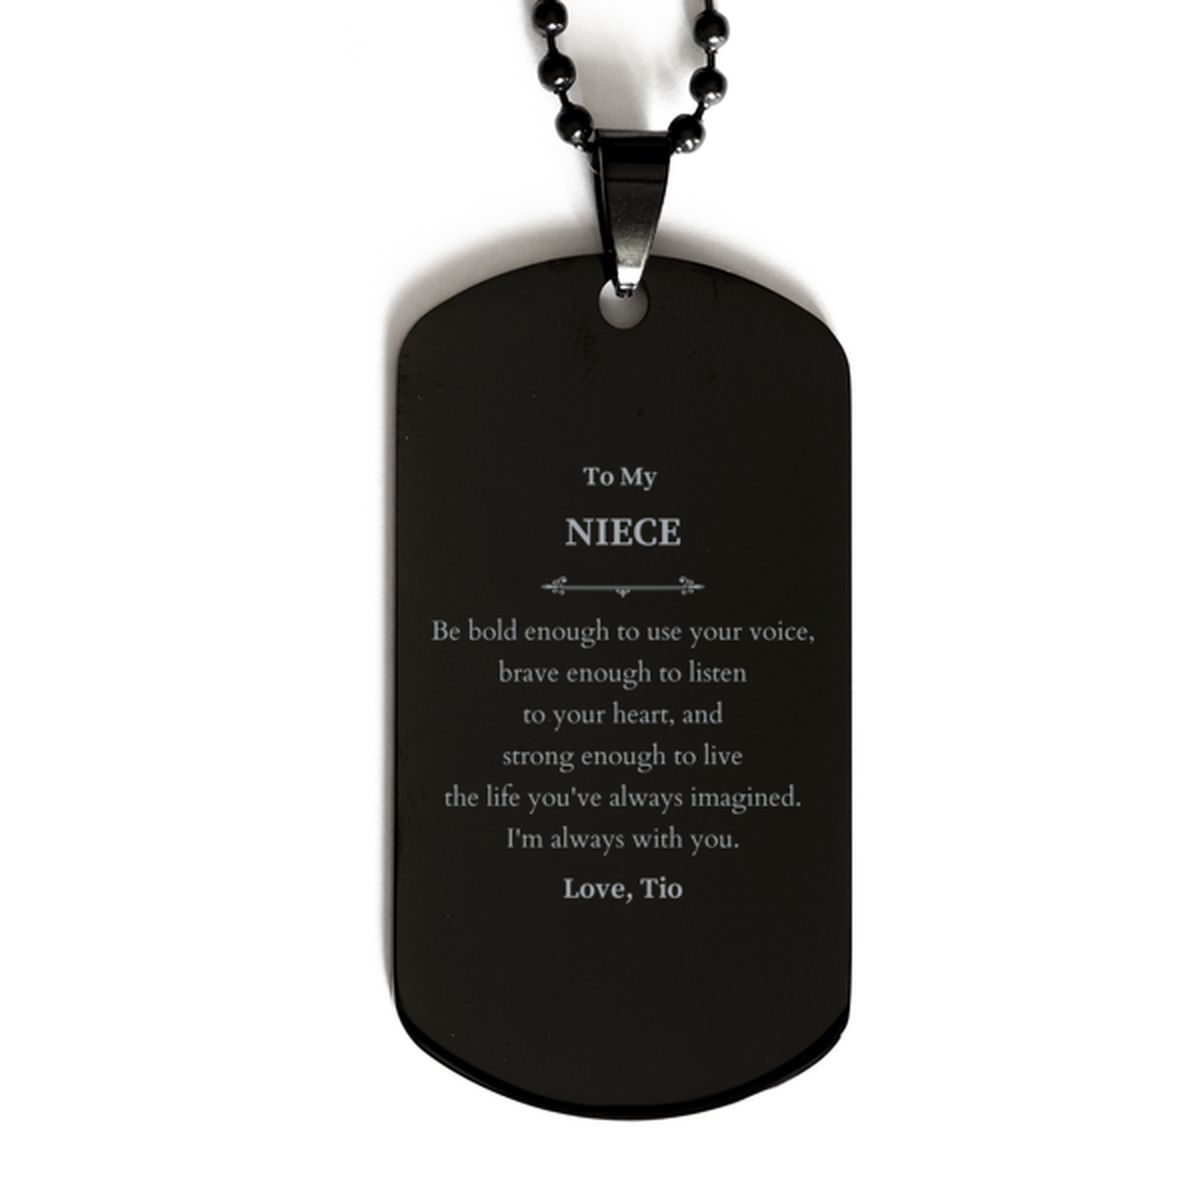 Keepsake Niece Black Dog Tag Gift Idea Graduation Christmas Birthday Niece from Tio, Niece Be bold enough to use your voice, brave enough to listen to your heart. Love, Tio